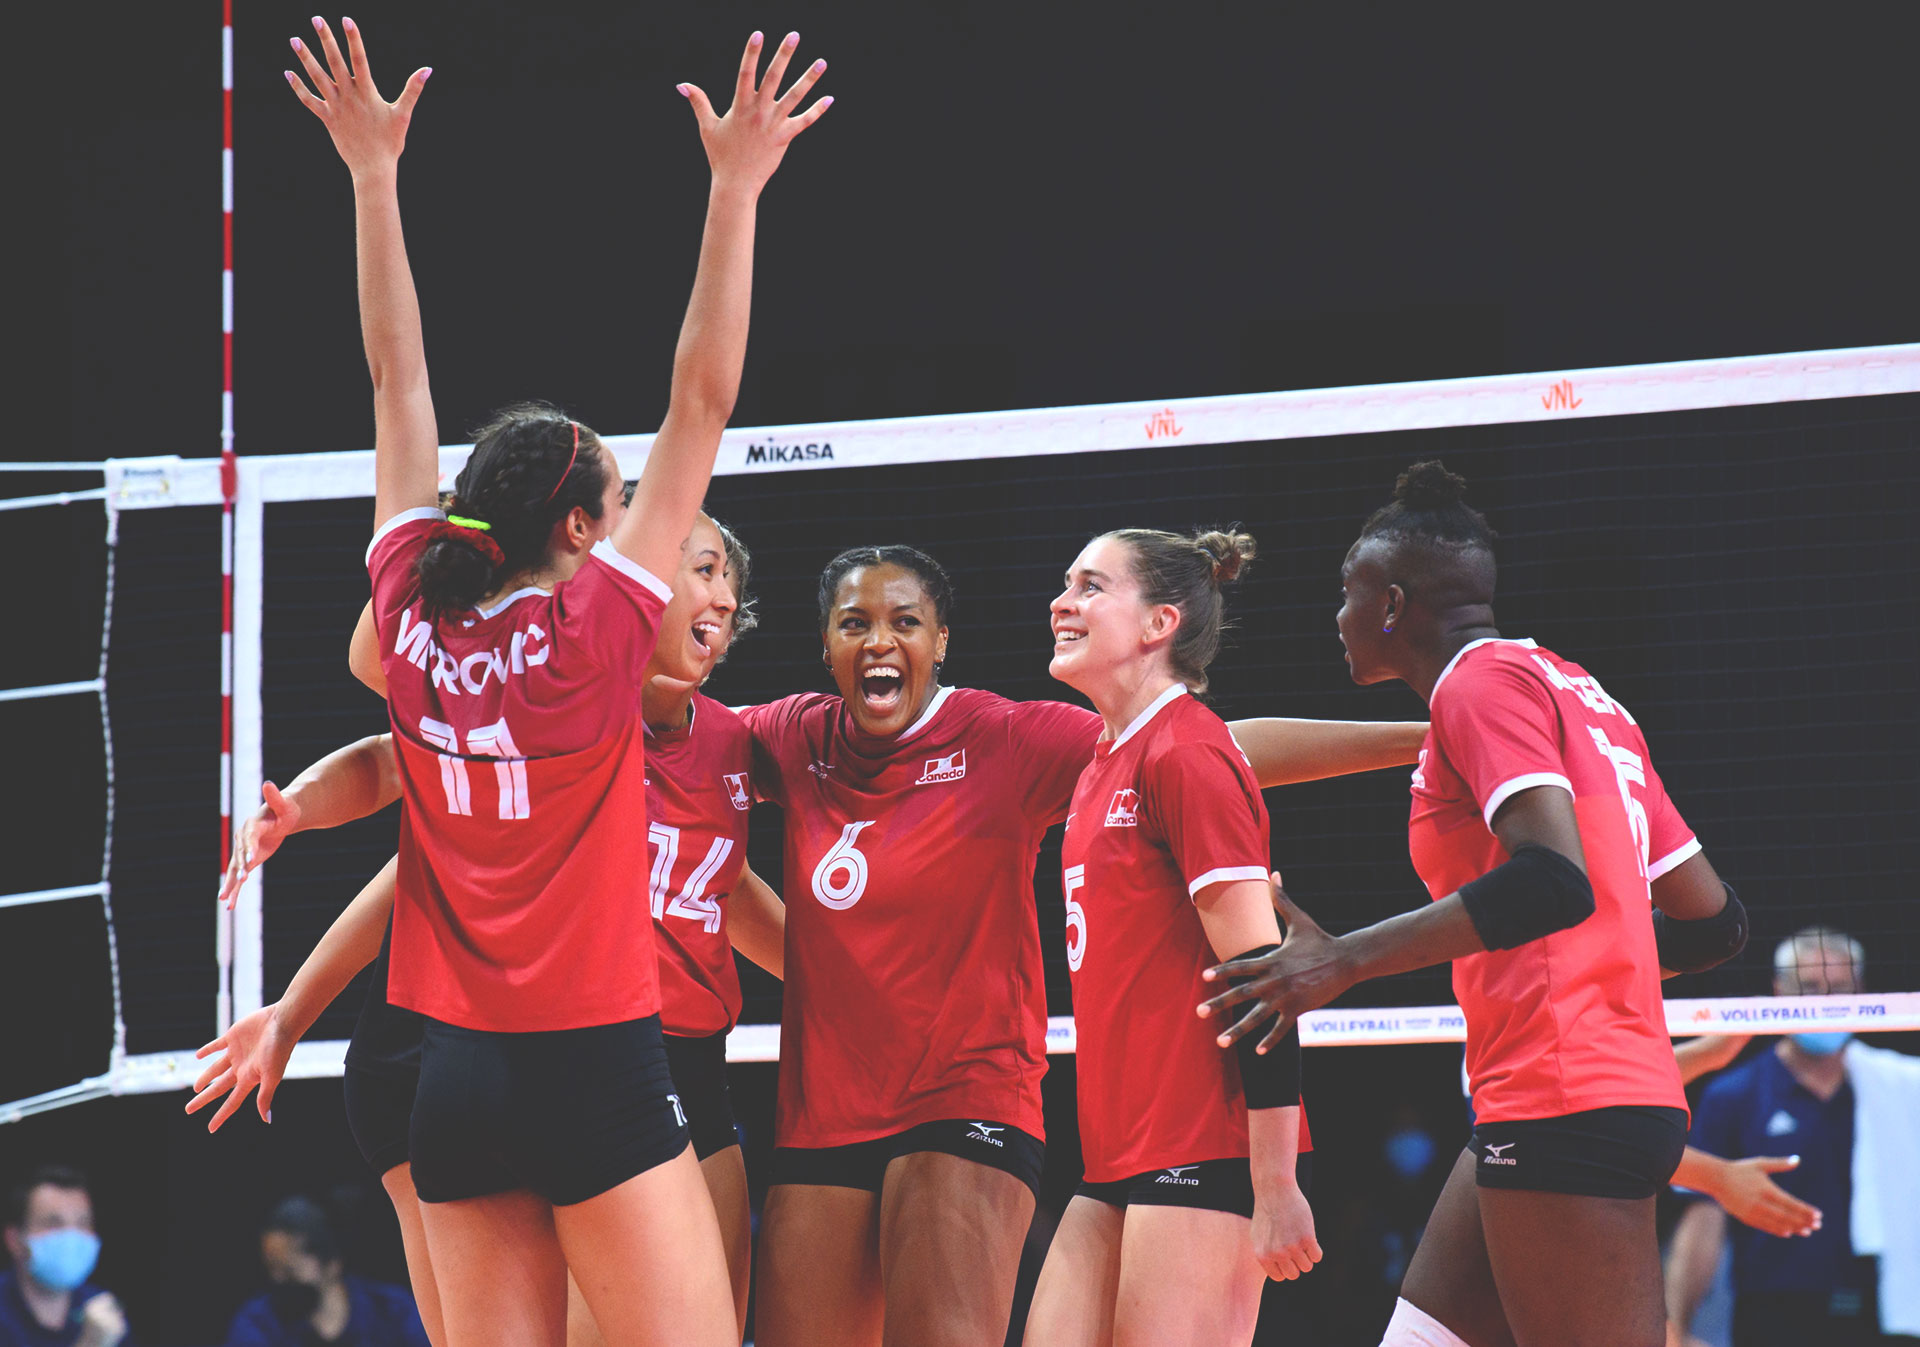 Women's Volleyball Nations League